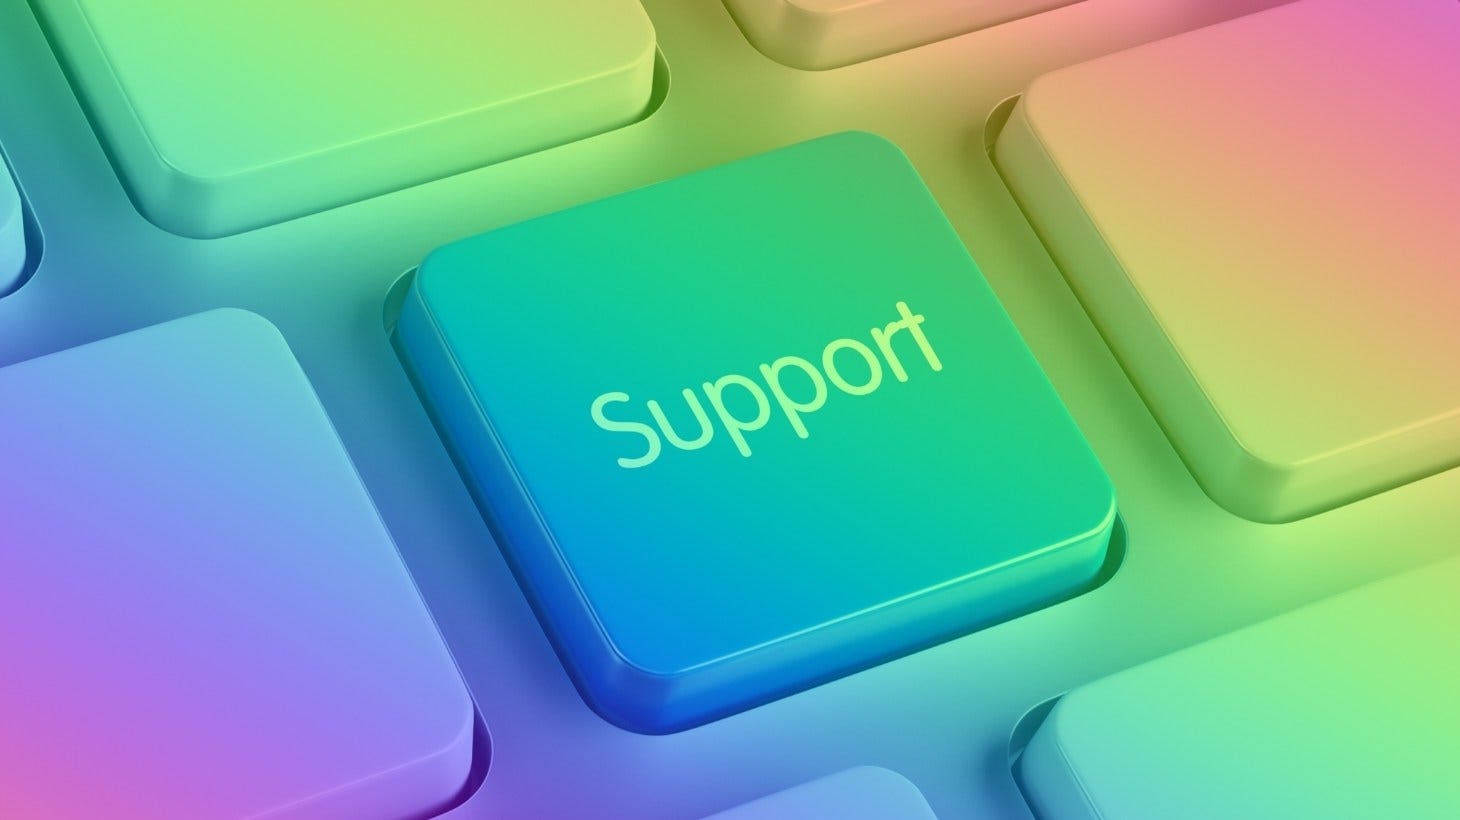 Support button on keyboard with rainbow filter 